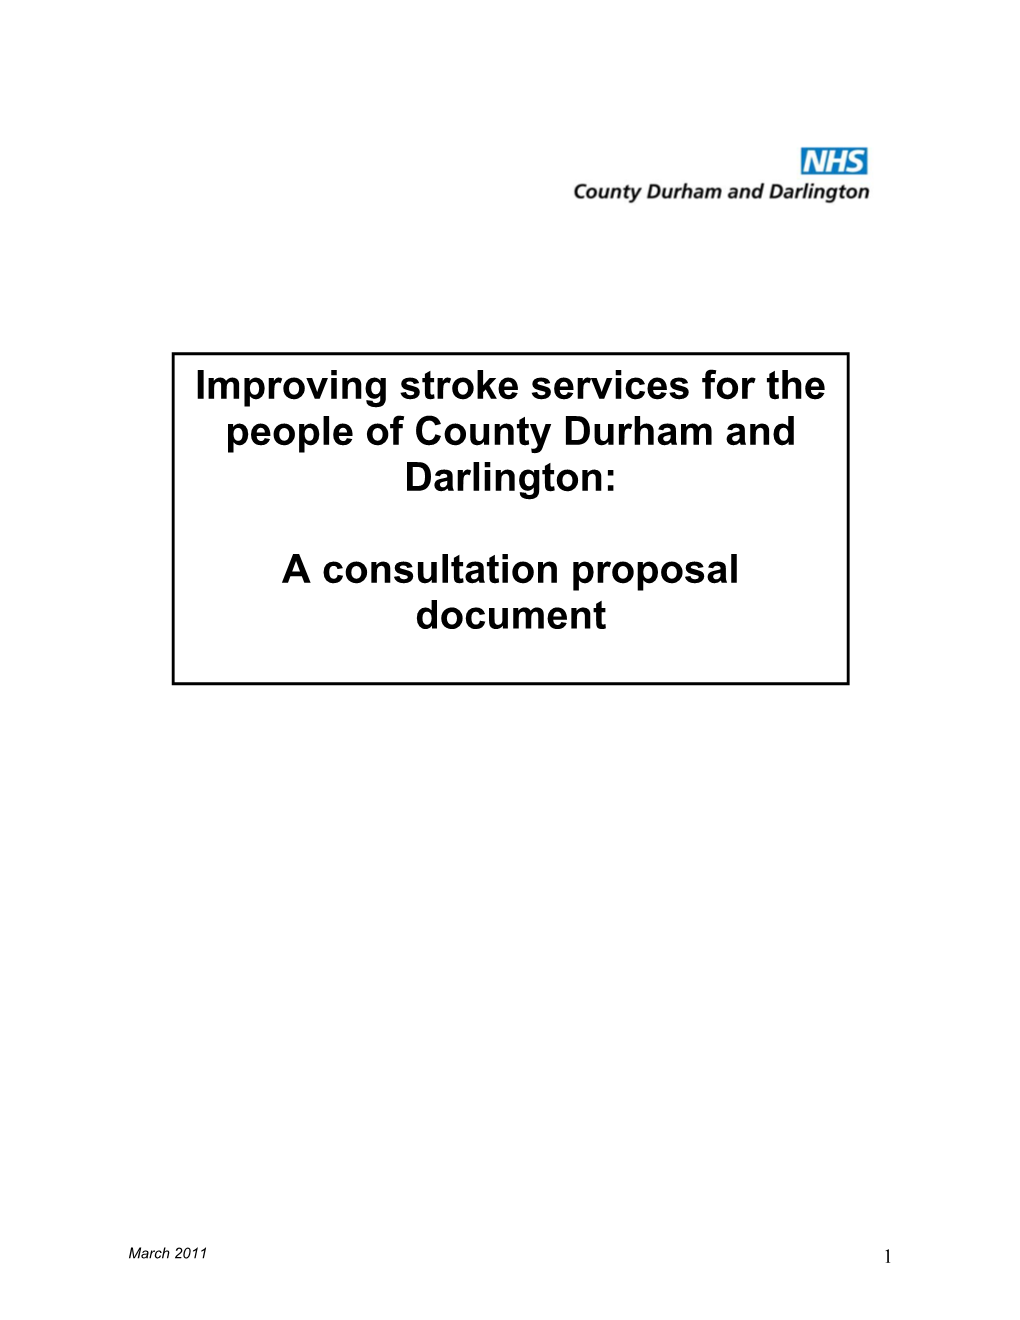 Improving Stroke Services for the People of County Durham And